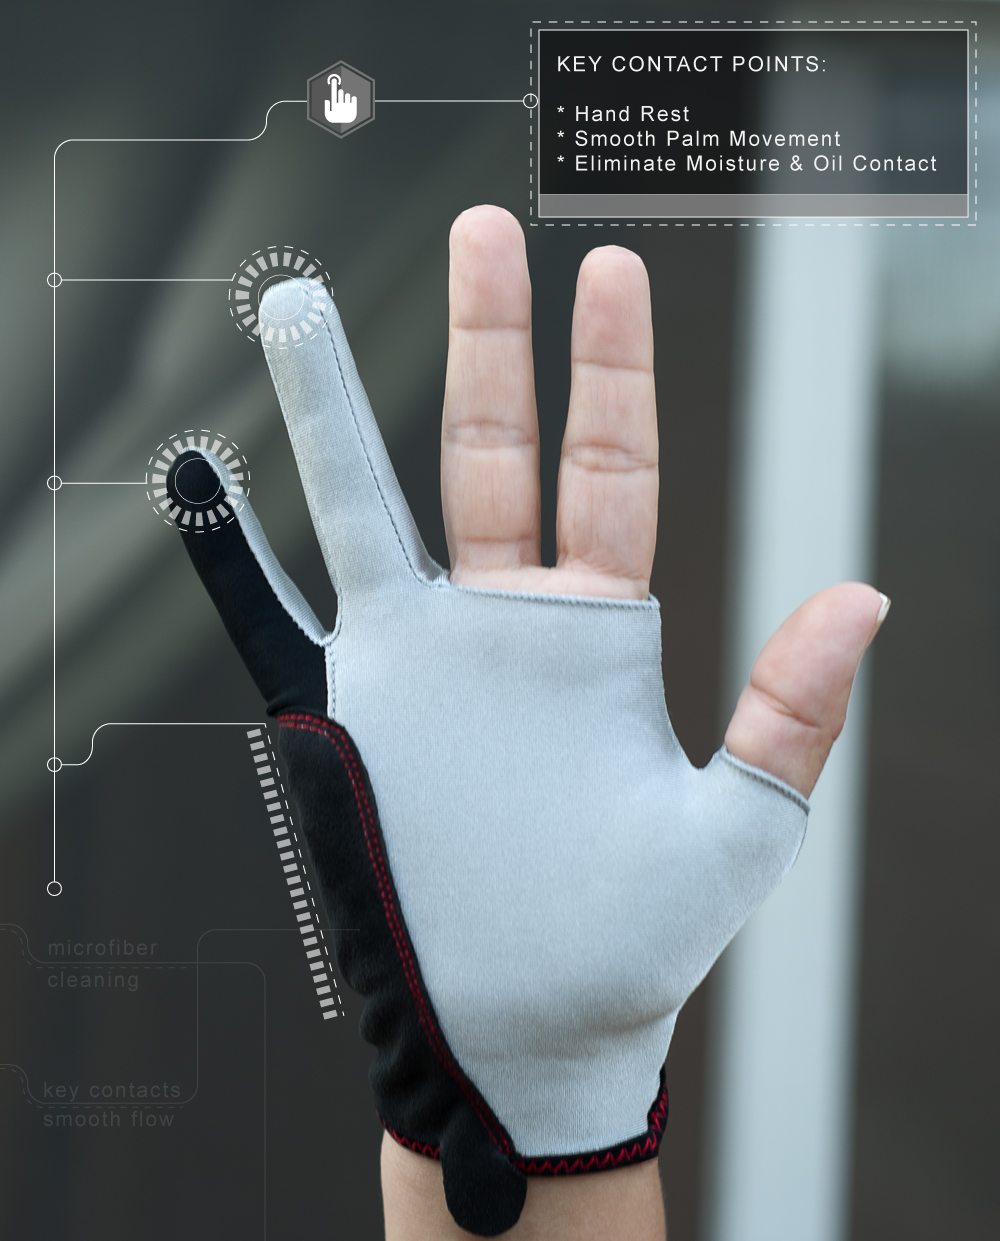 Artist Glove Drawing Tablet, Touch Glove Graphic Tablet